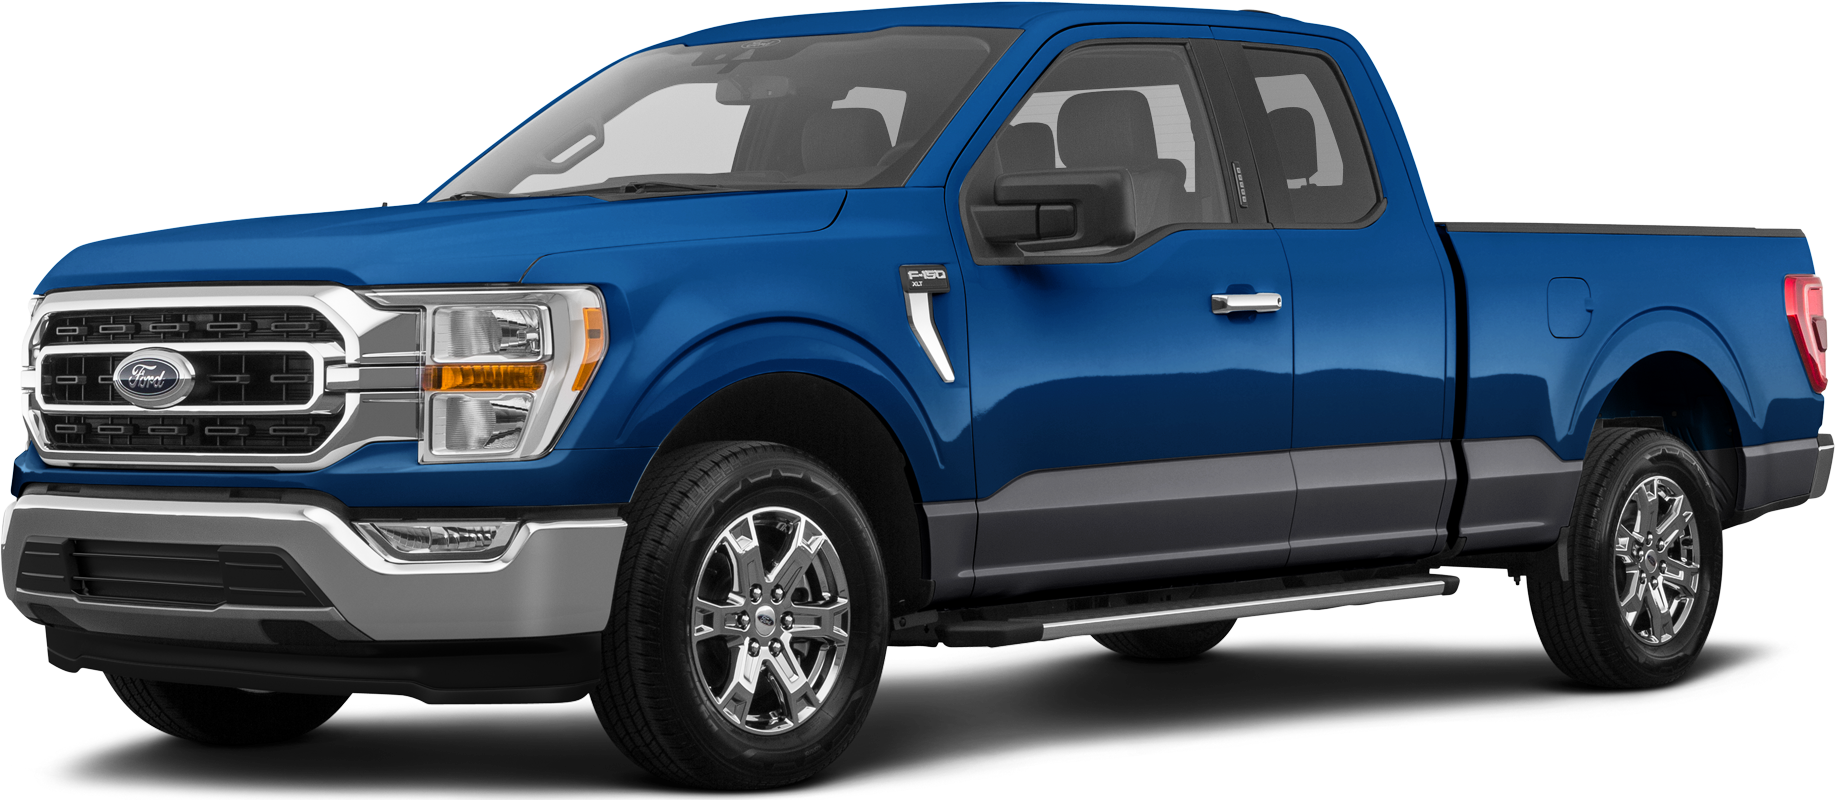 2023 Ford F150 Super Cab Price, Reviews, Pictures & More